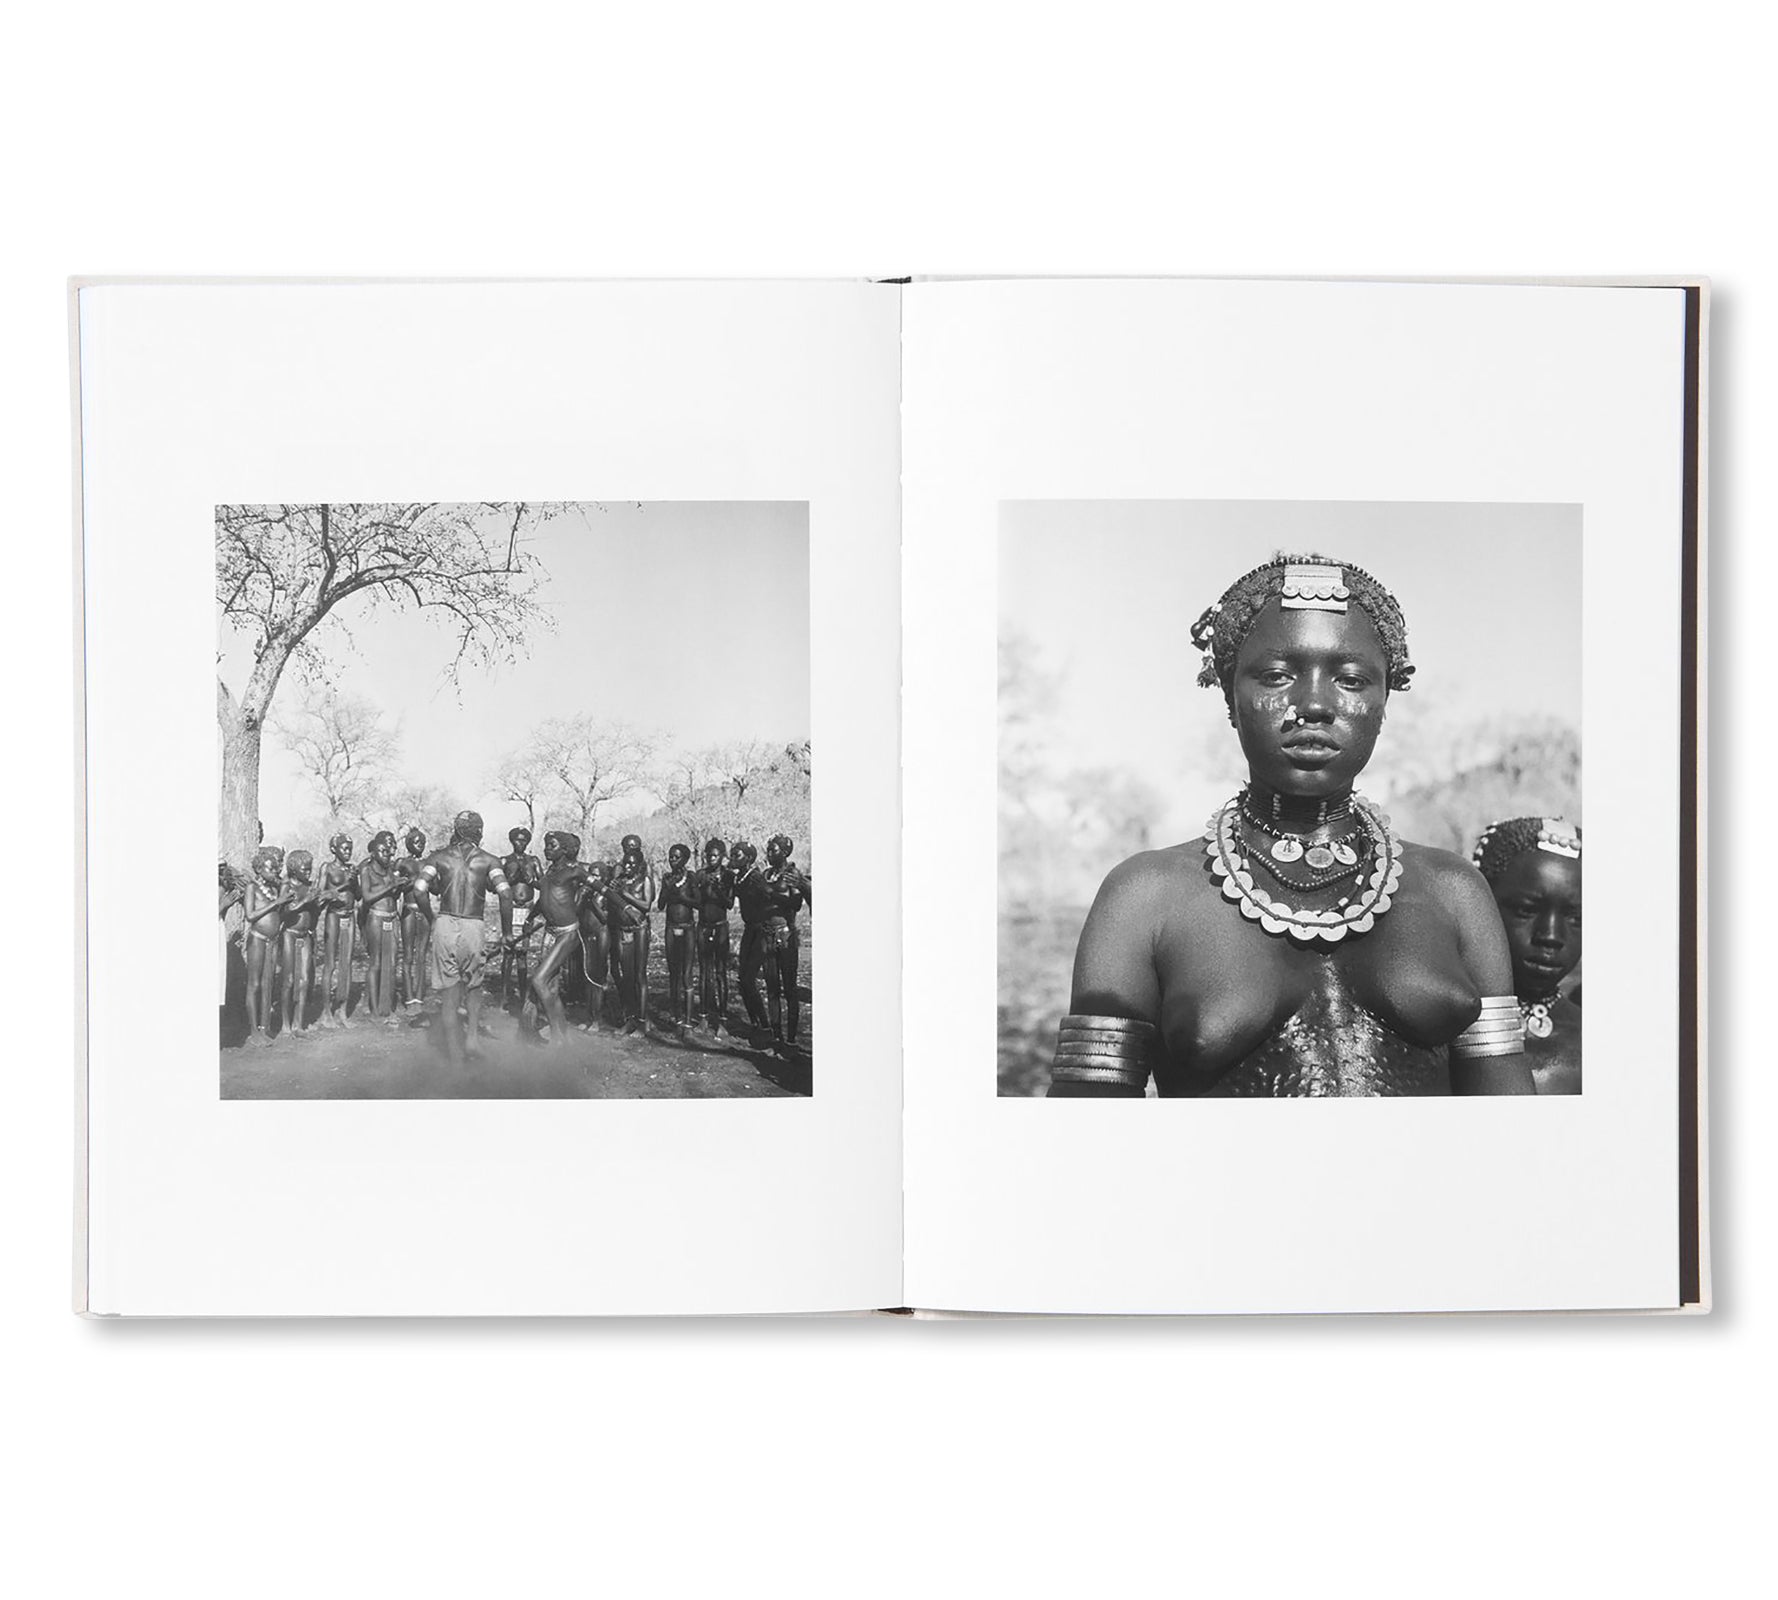 SOUTHERN SUDAN by George Rodger